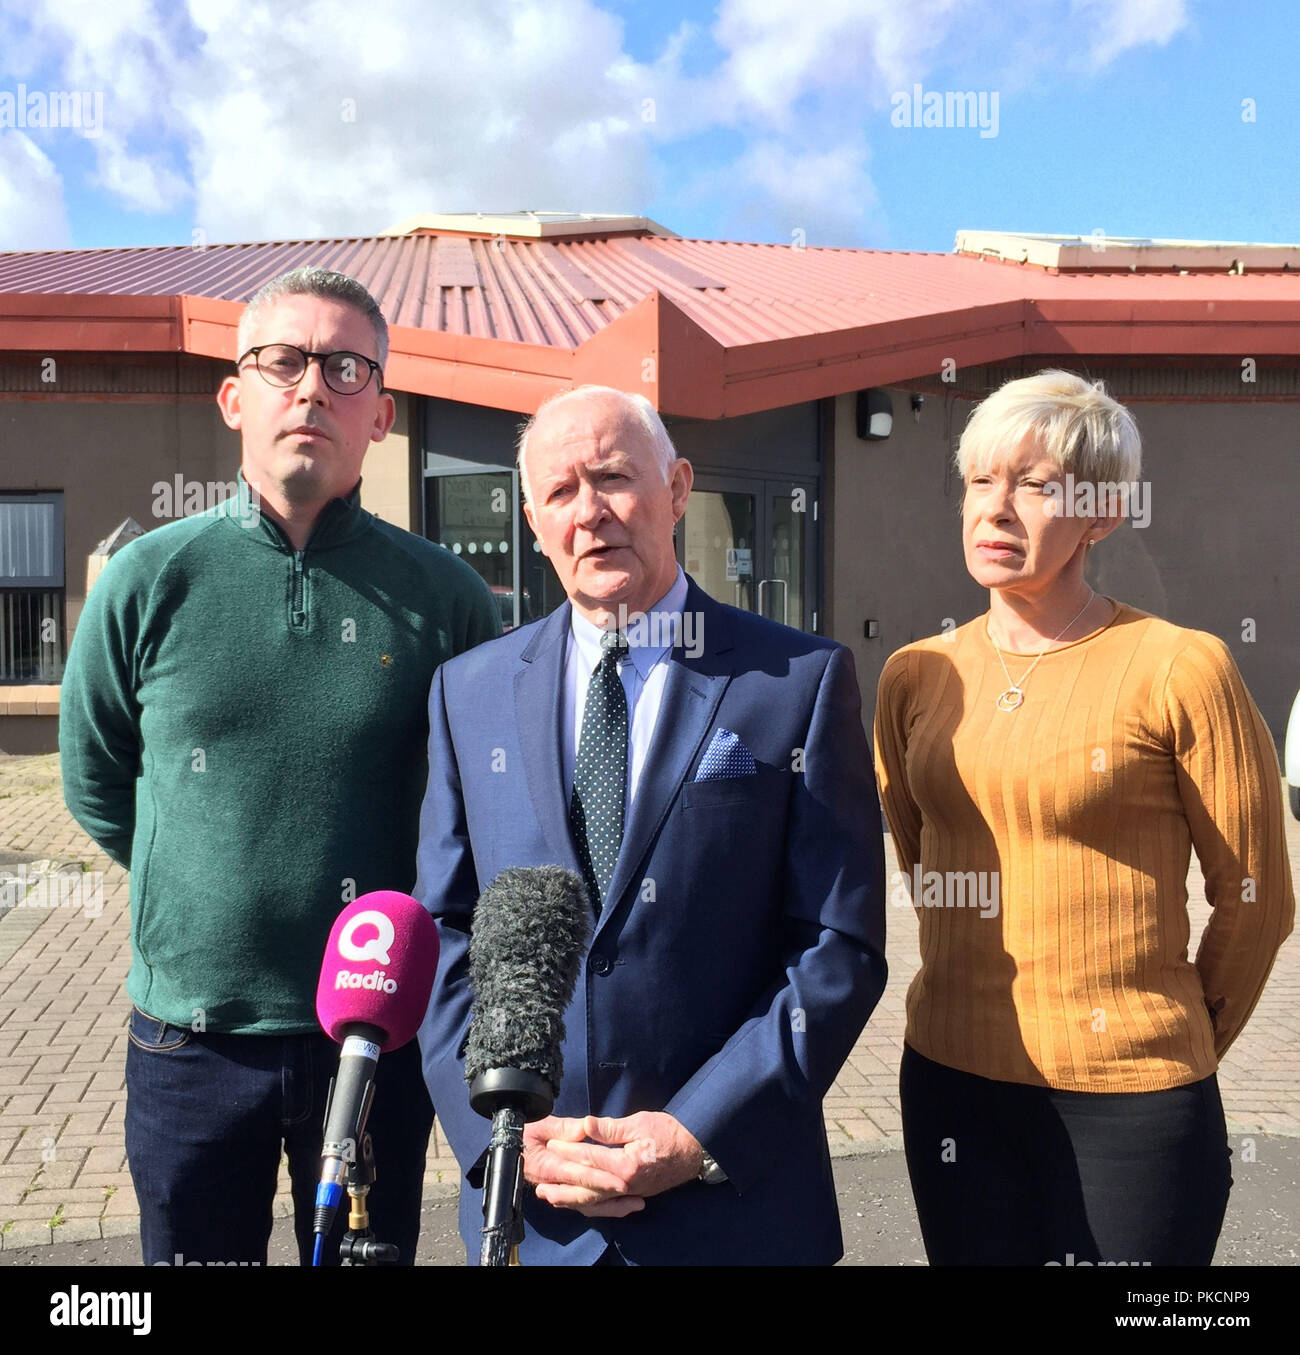 Liam Shannon, one of so-called Hooded Men, with Sinn Fein senator Niall O Donnghaile (left) and Sinn Fein councillor Mairead O&Otilde;Donnell, reacts to European court decision outside the Short Strand Community Centre in east Belfast. Shannon said the European Court of Human Rights (ECHR) had made an &quot;awful mistake&quot; by rejecting an Irish government appeal against a ruling that found the UK did not torture him and 13 other men interned without trial in the early 1970s. Stock Photo